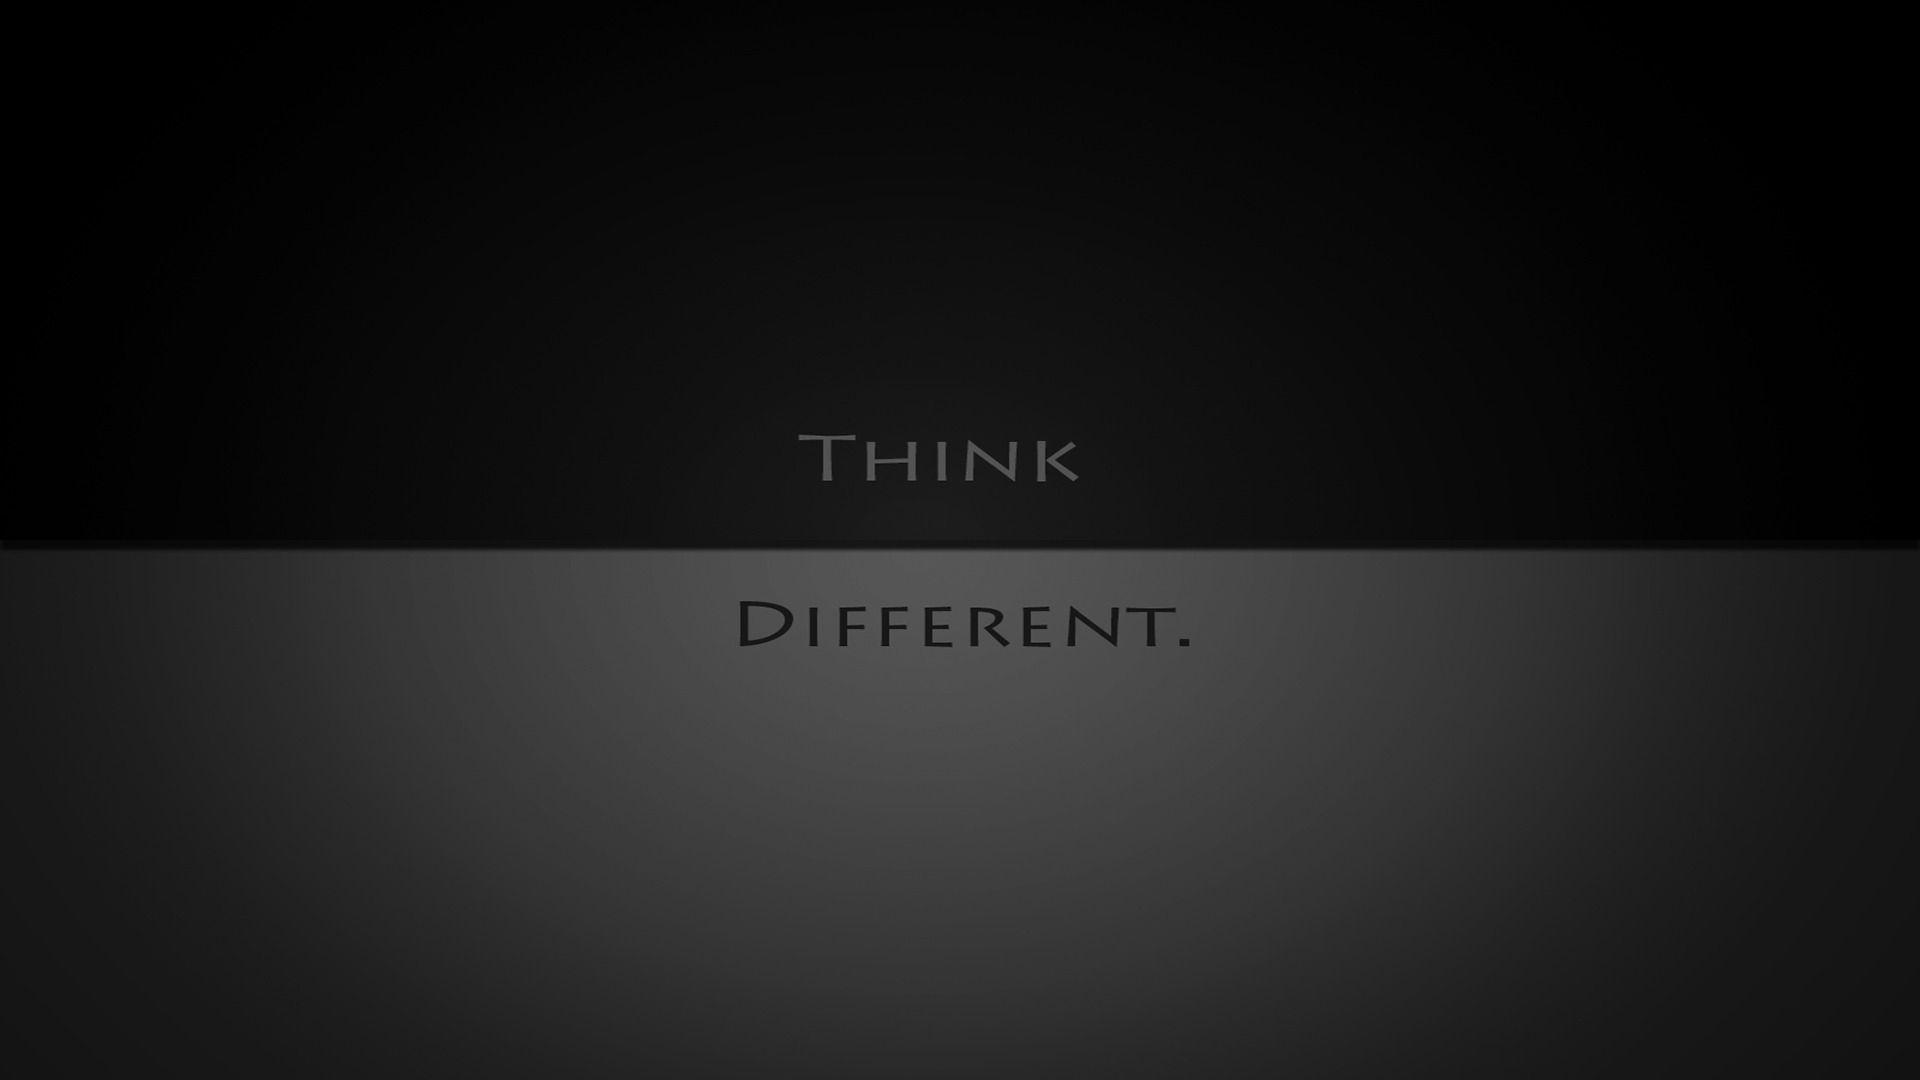 Think Different Wallpaper